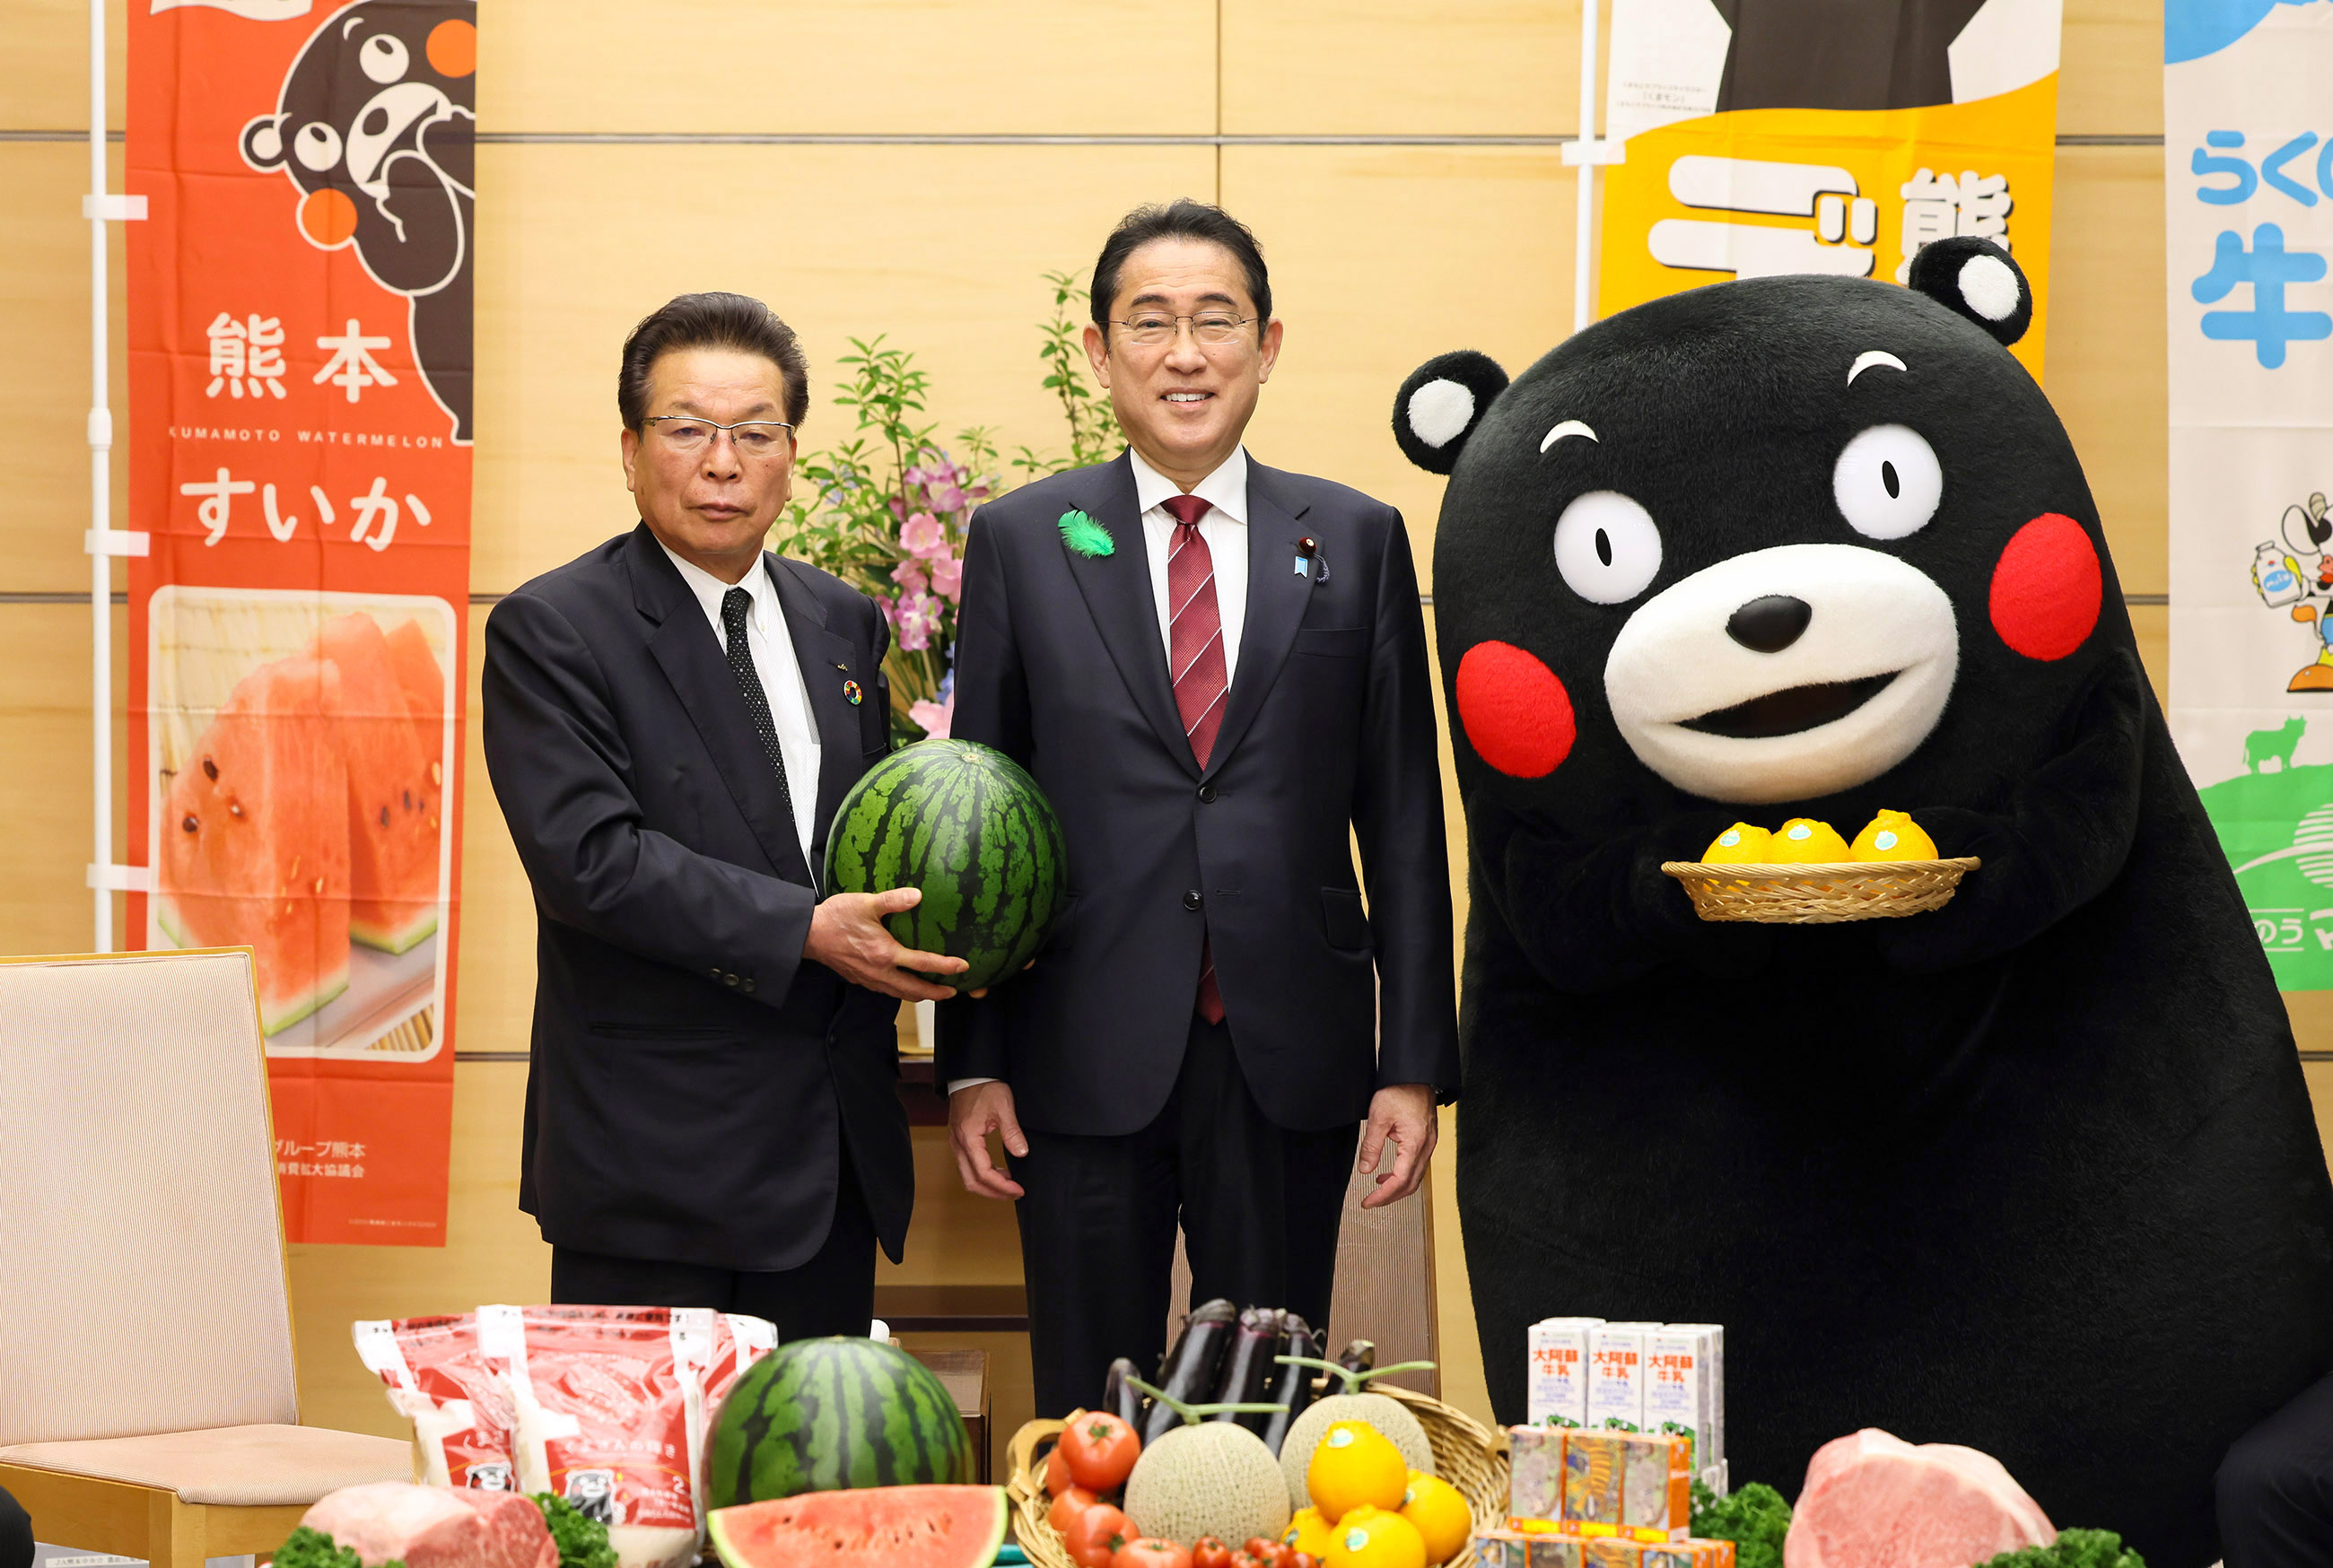 Prime Minister Kishida being presented with watermelons and Dekopons (1)